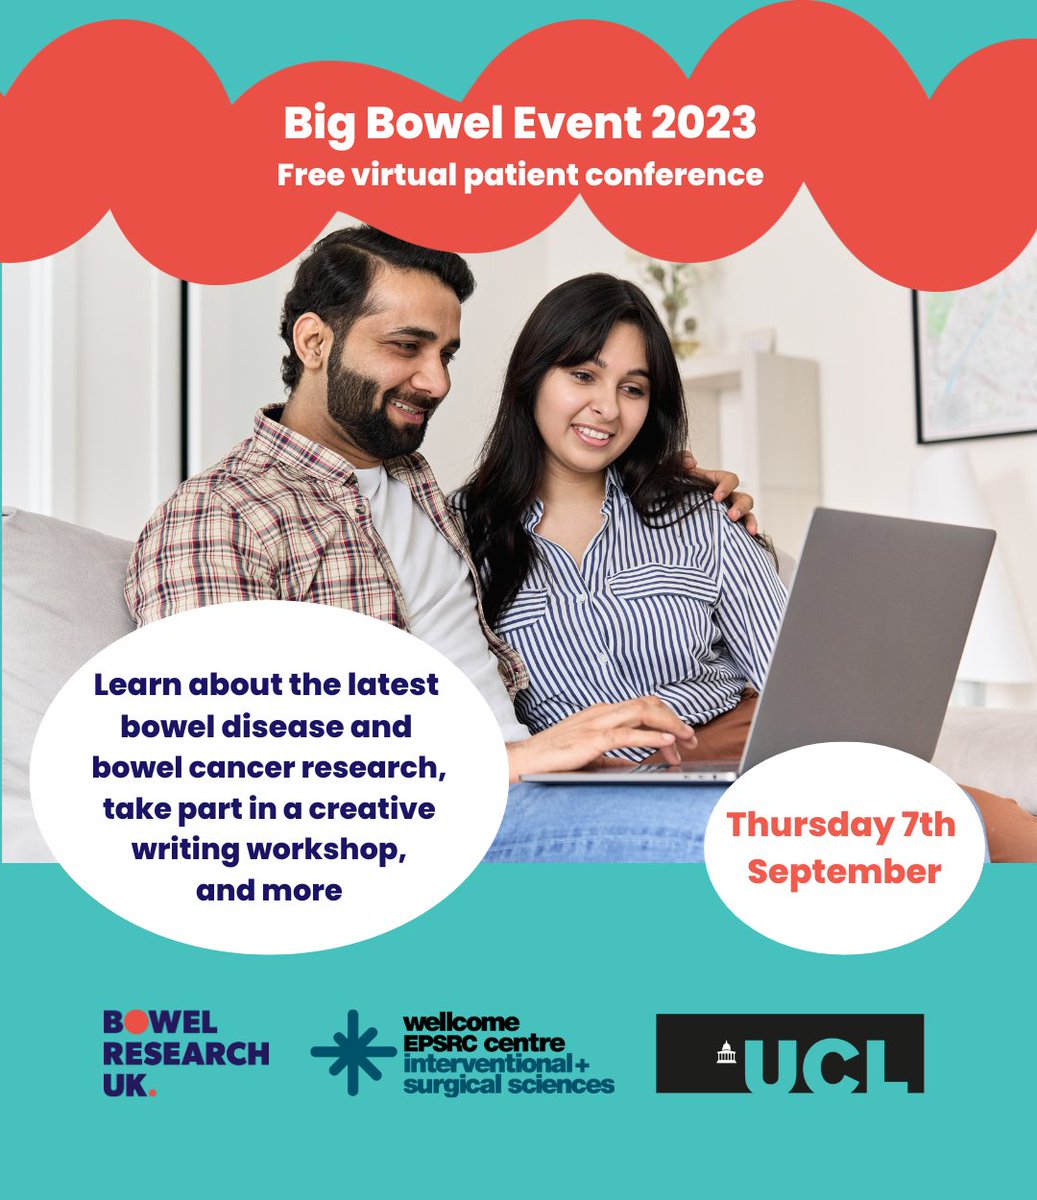 Only one week to go until the Big Bowel Event! At this virtual patient conference, you can expect to hear from researchers and patients about exciting developments in bowel disease and bowel cancer research. Get your free tickets now! > eventbrite.com/e/big-bowel-ev… #Bowels #PPI